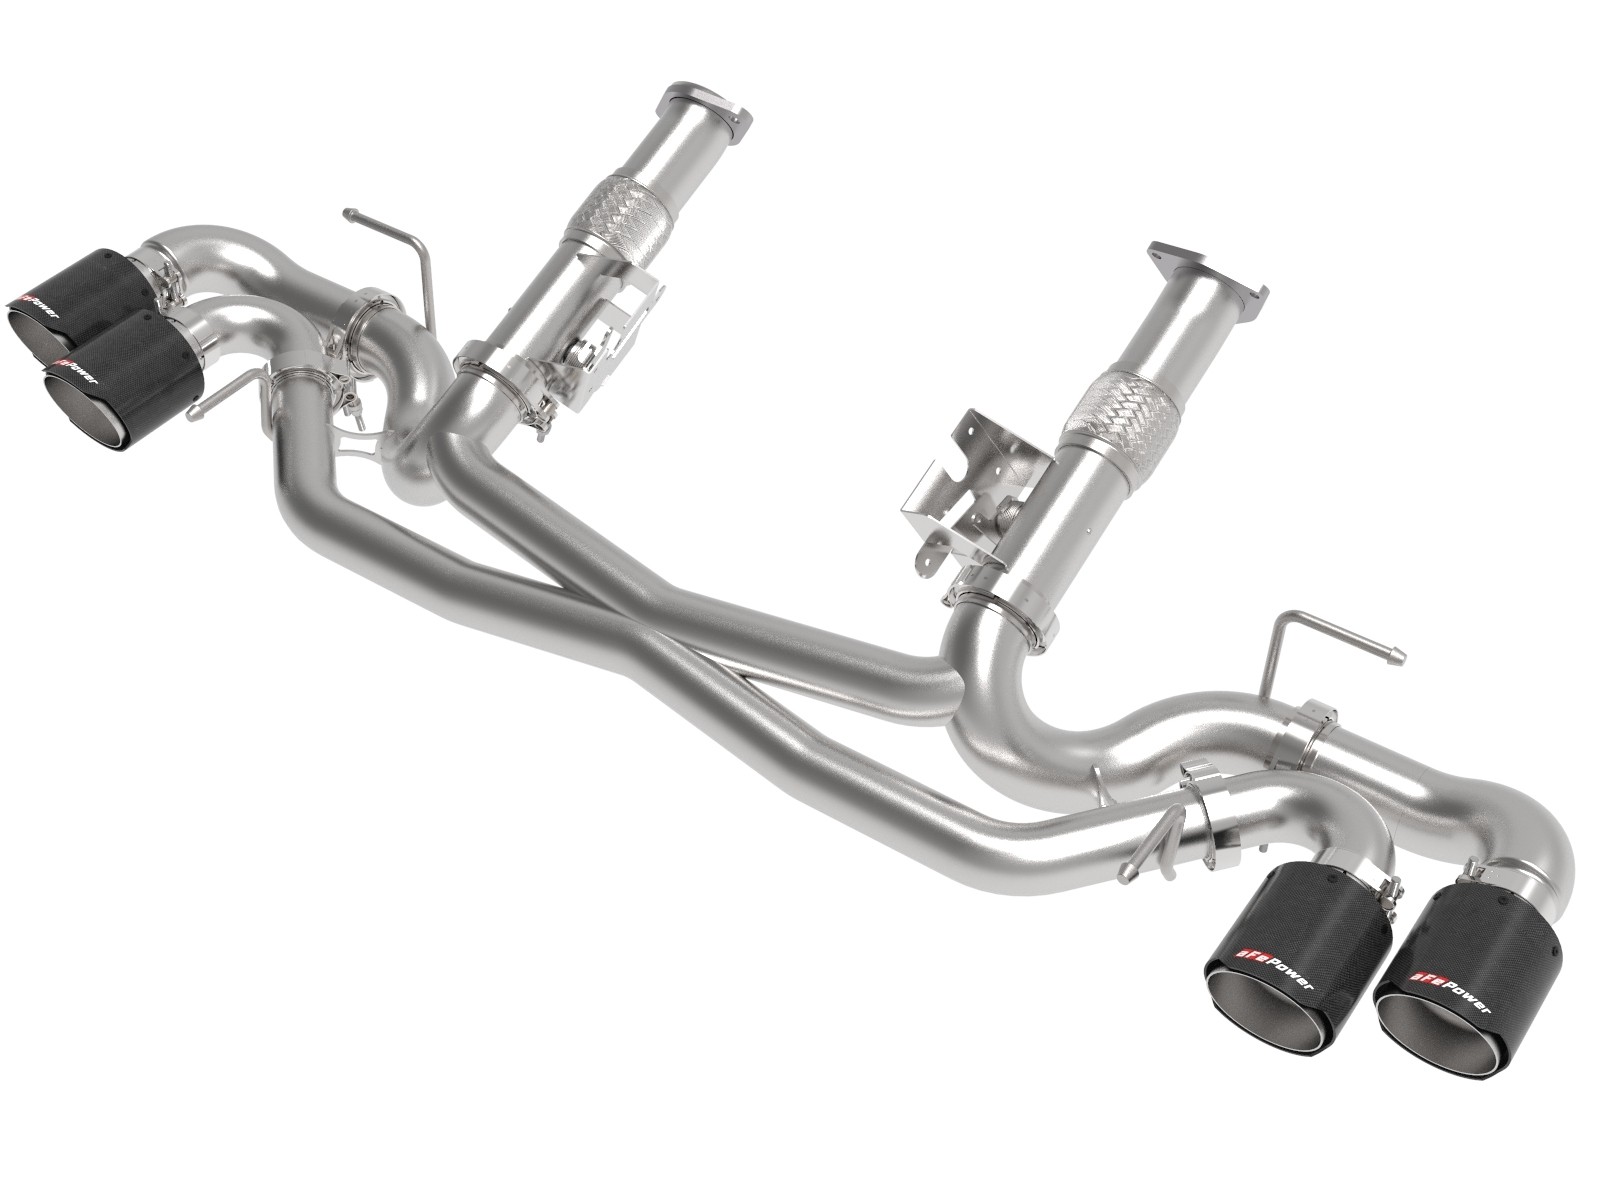 C8 Corvette 2020- MACH Force-Xp 304 Stainless Steel Cat-Back Exhaust w/o Muffler Carbon (No NPP)